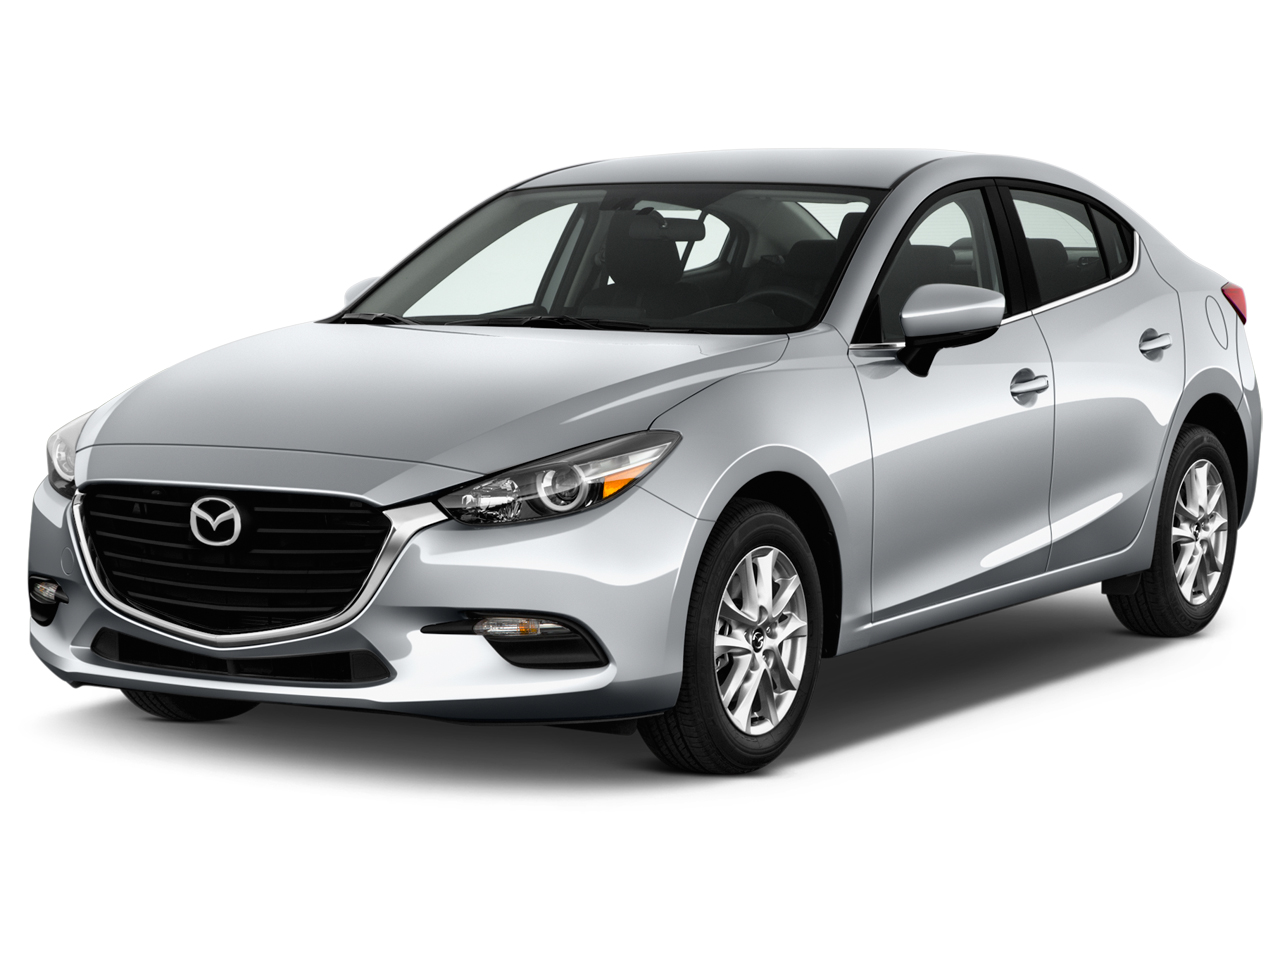 2018 Mazda Mazda3 4-Door Review, Ratings, Specs, Prices, and Photos ...